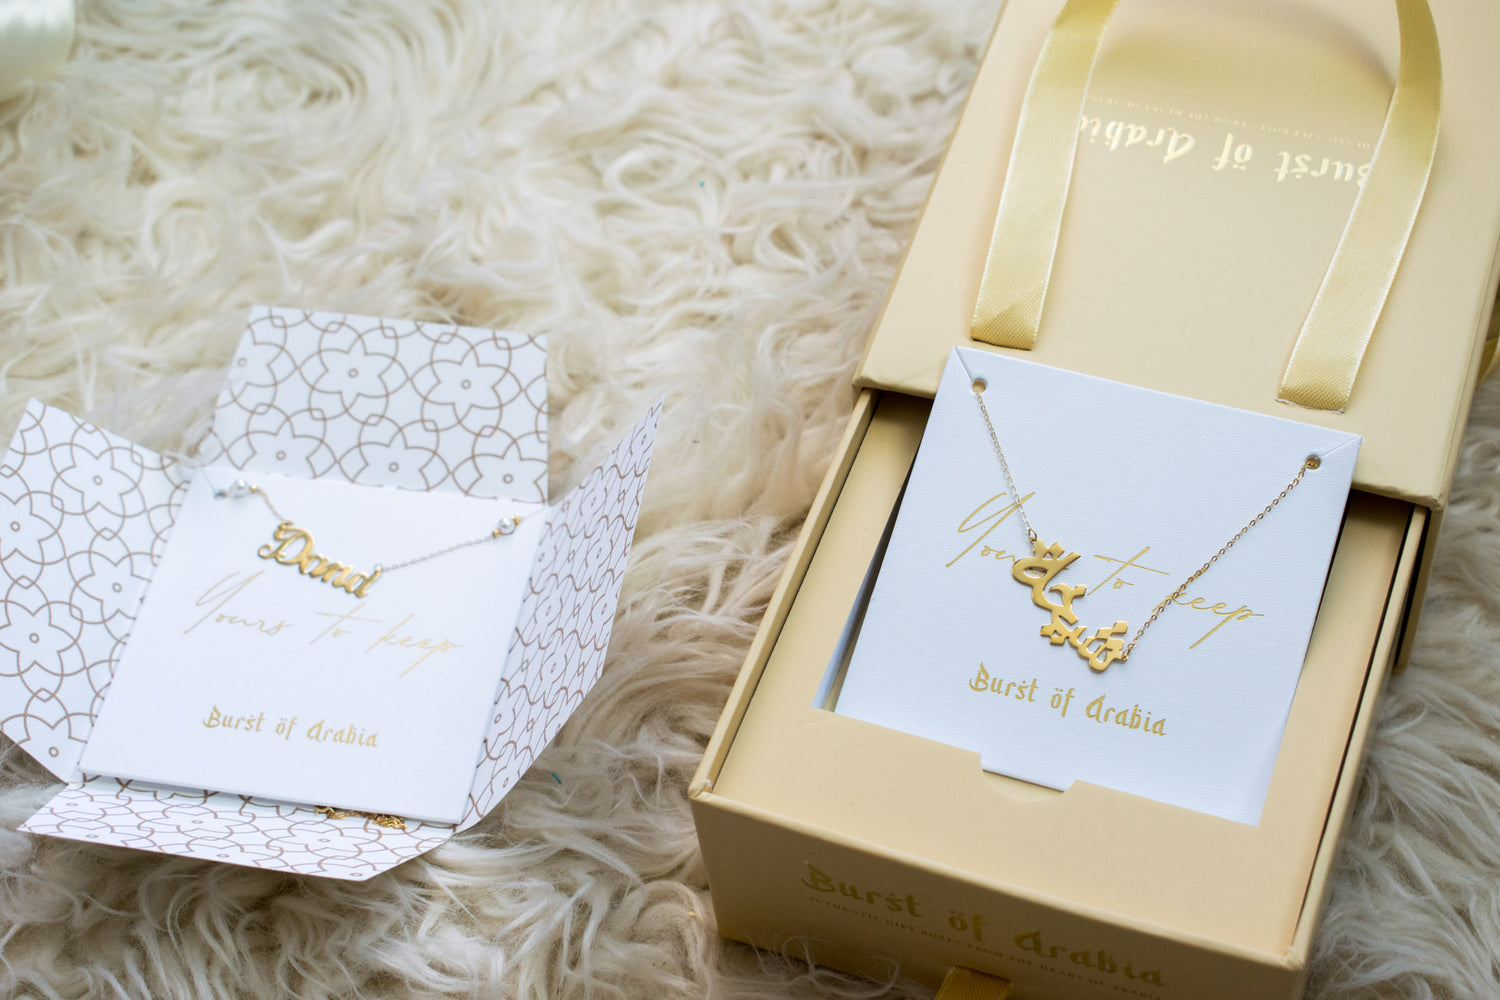 Elevate your gifting experience with our luxurious collection for women. Discover opulent presents, from personalized gold jewelry to high-end accessories.